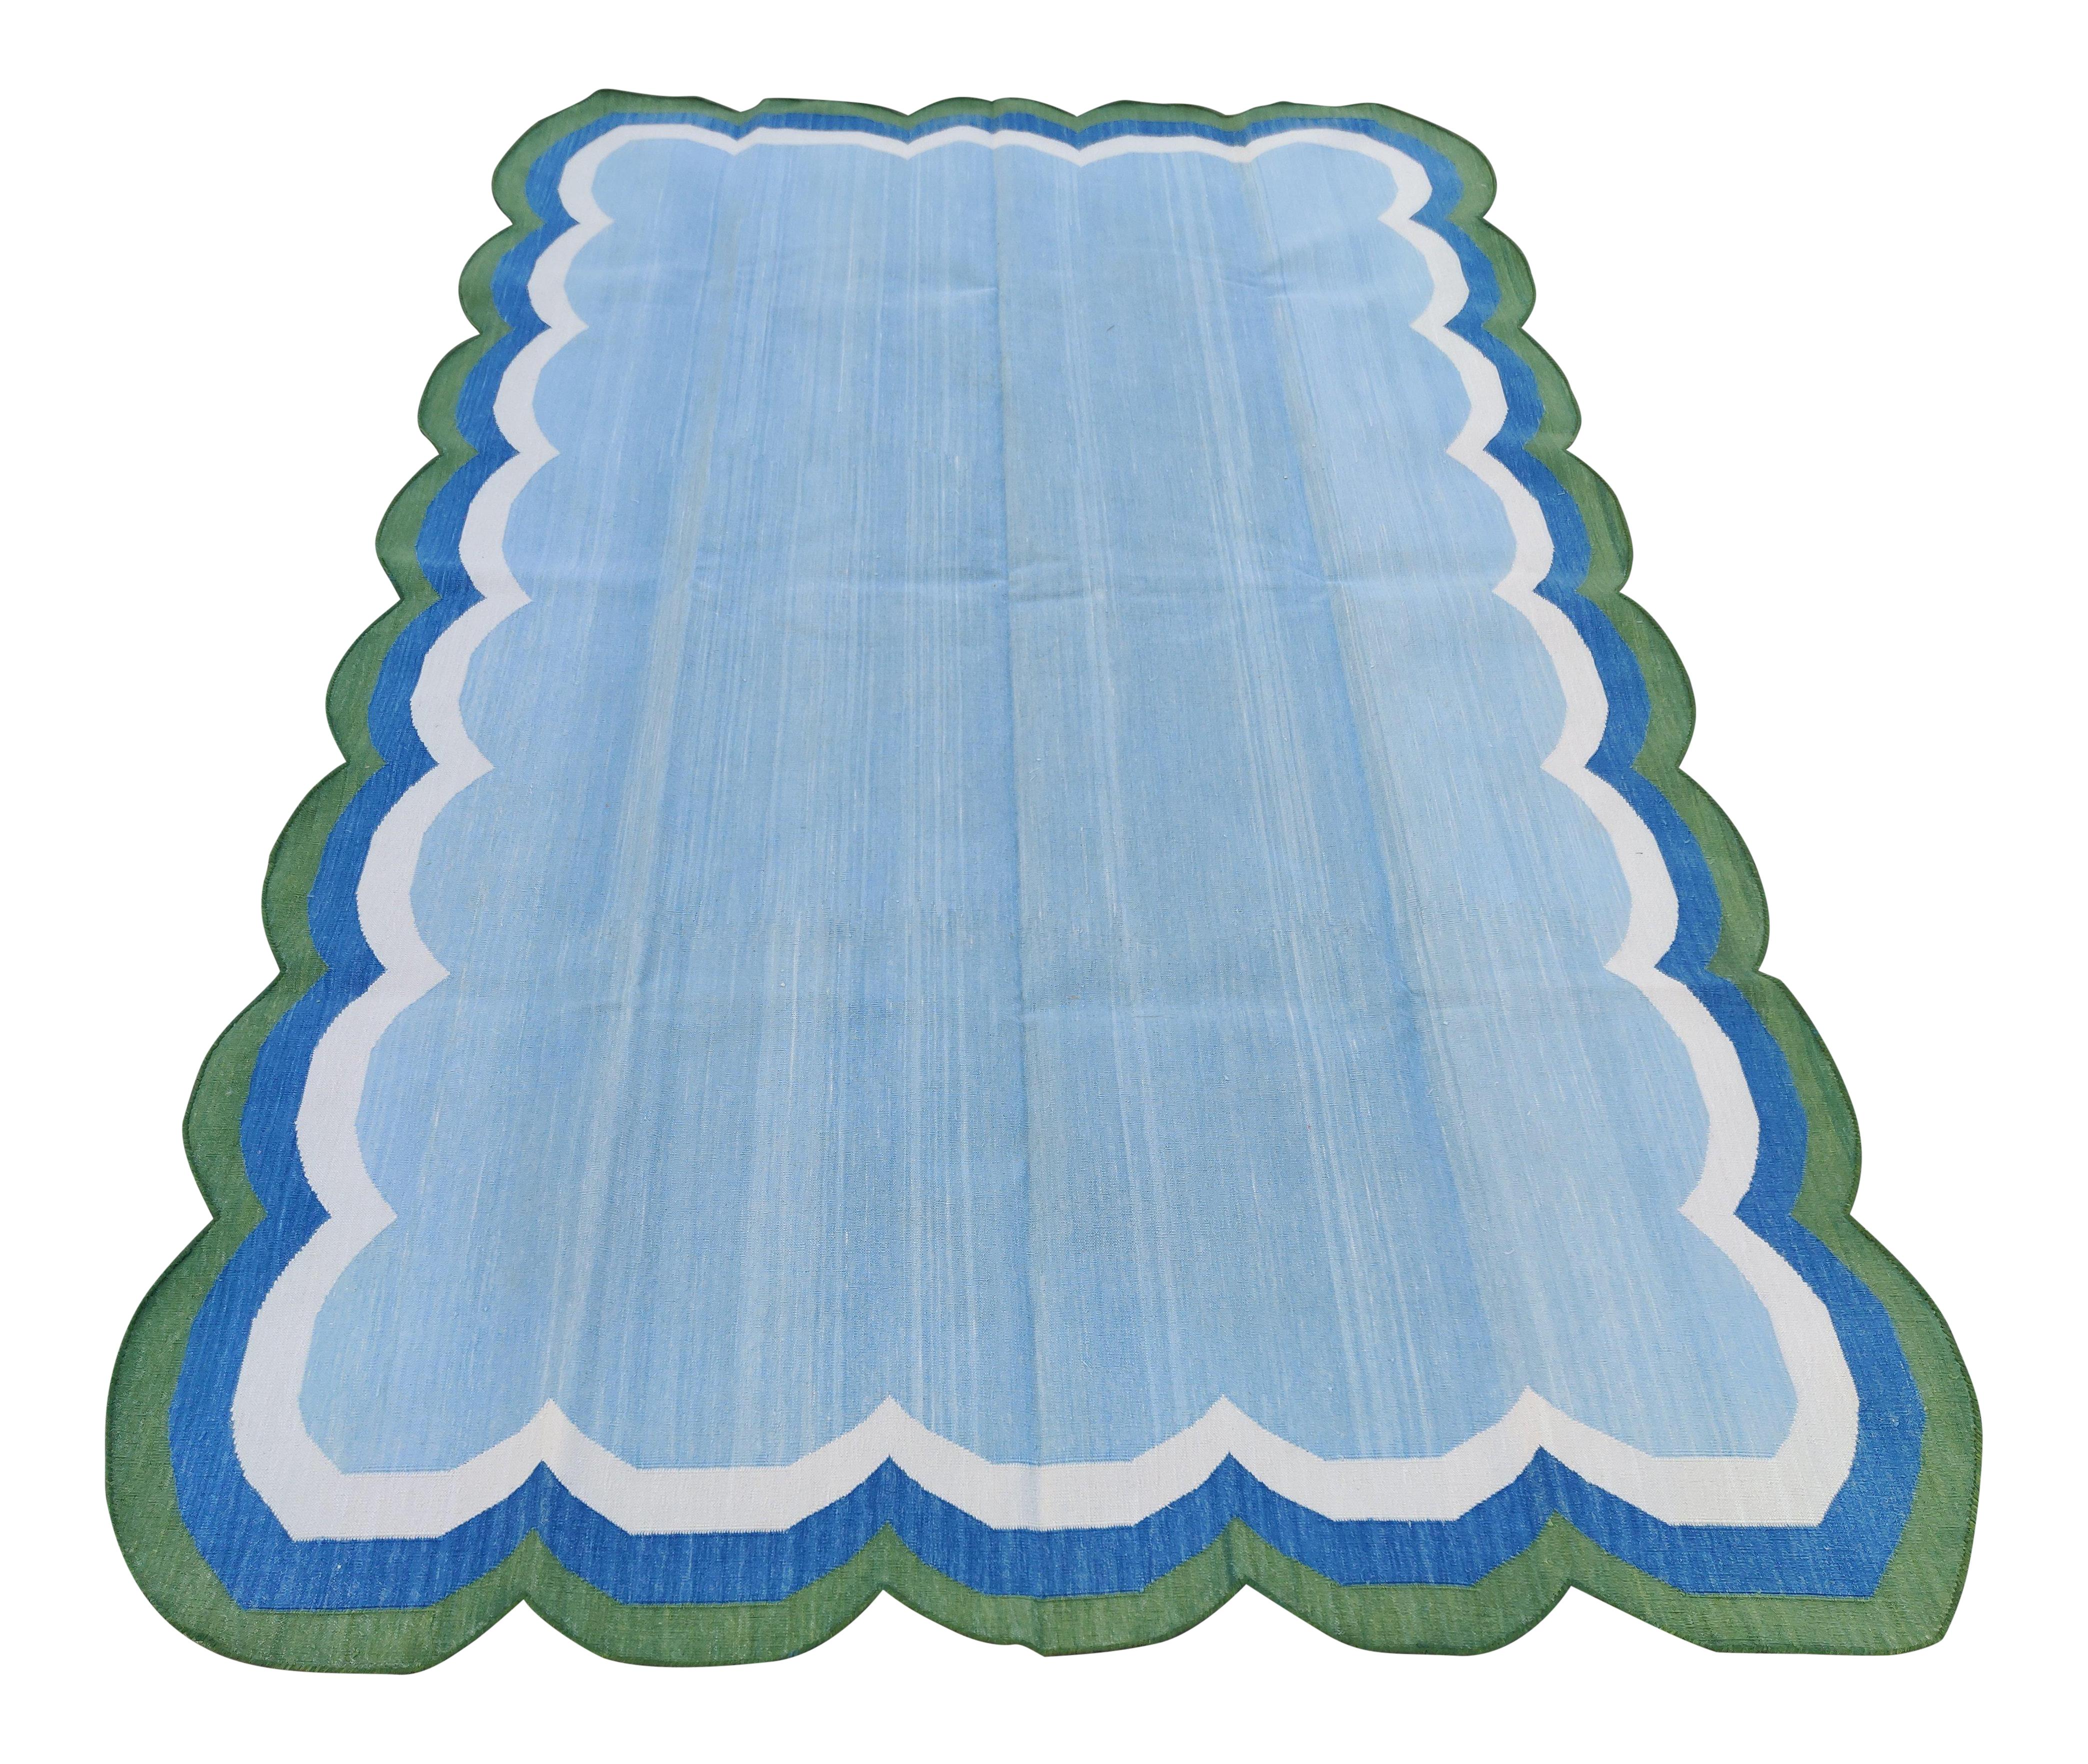 Cotton Vegetable Dyed Blue and Green Four Sided Scalloped Striped Indian Dhurrie Rug-5'x8' 

These special flat-weave dhurries are hand-woven with 15 ply 100% cotton yarn. Due to the special manufacturing techniques used to create our rugs, the size